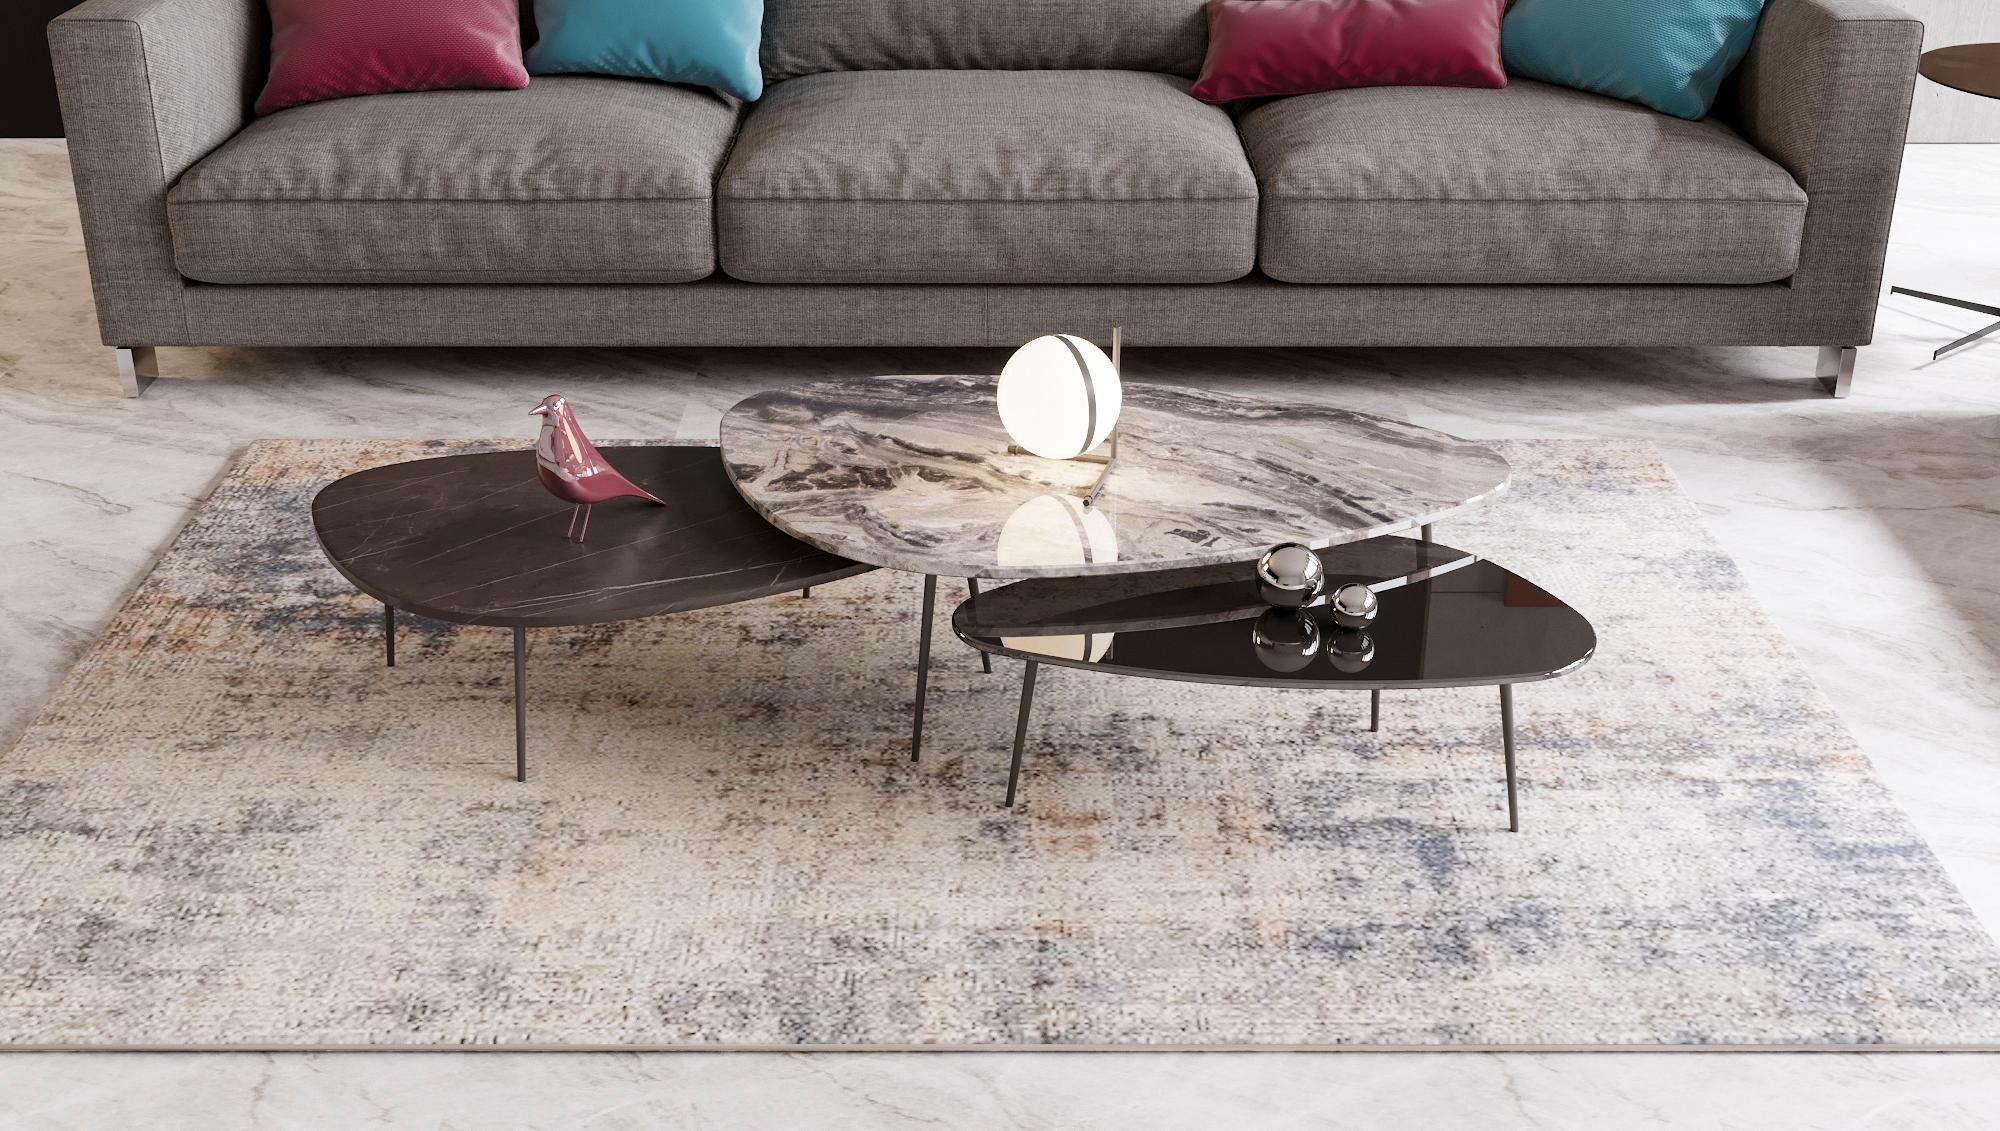 A set of 3 coffee tables of different top material and variable height dimensions. Each table top has an asymmetrical elongated egg shape that is made of either trendy marble or glass carried by 3 cone-shaped metal legs. The set is suitable for